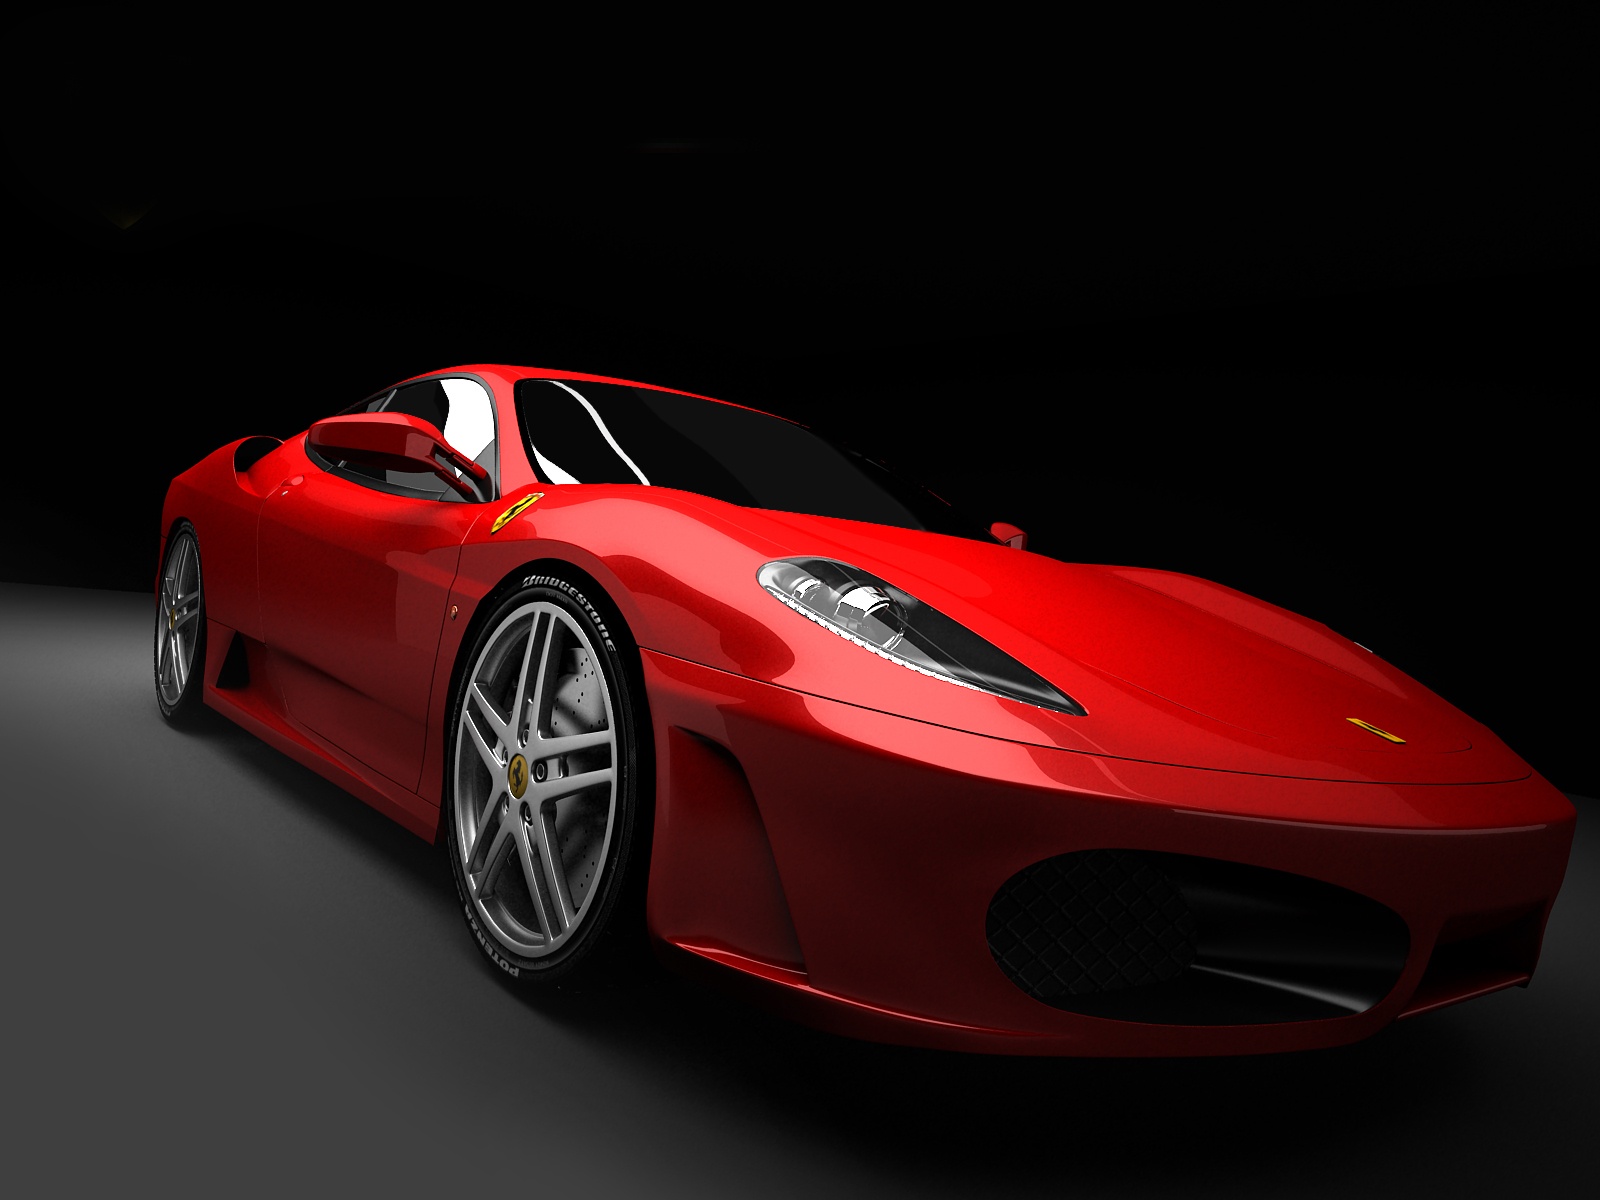 Ferrari F430 RED Wallpapers in jpg format for download 1600x1200